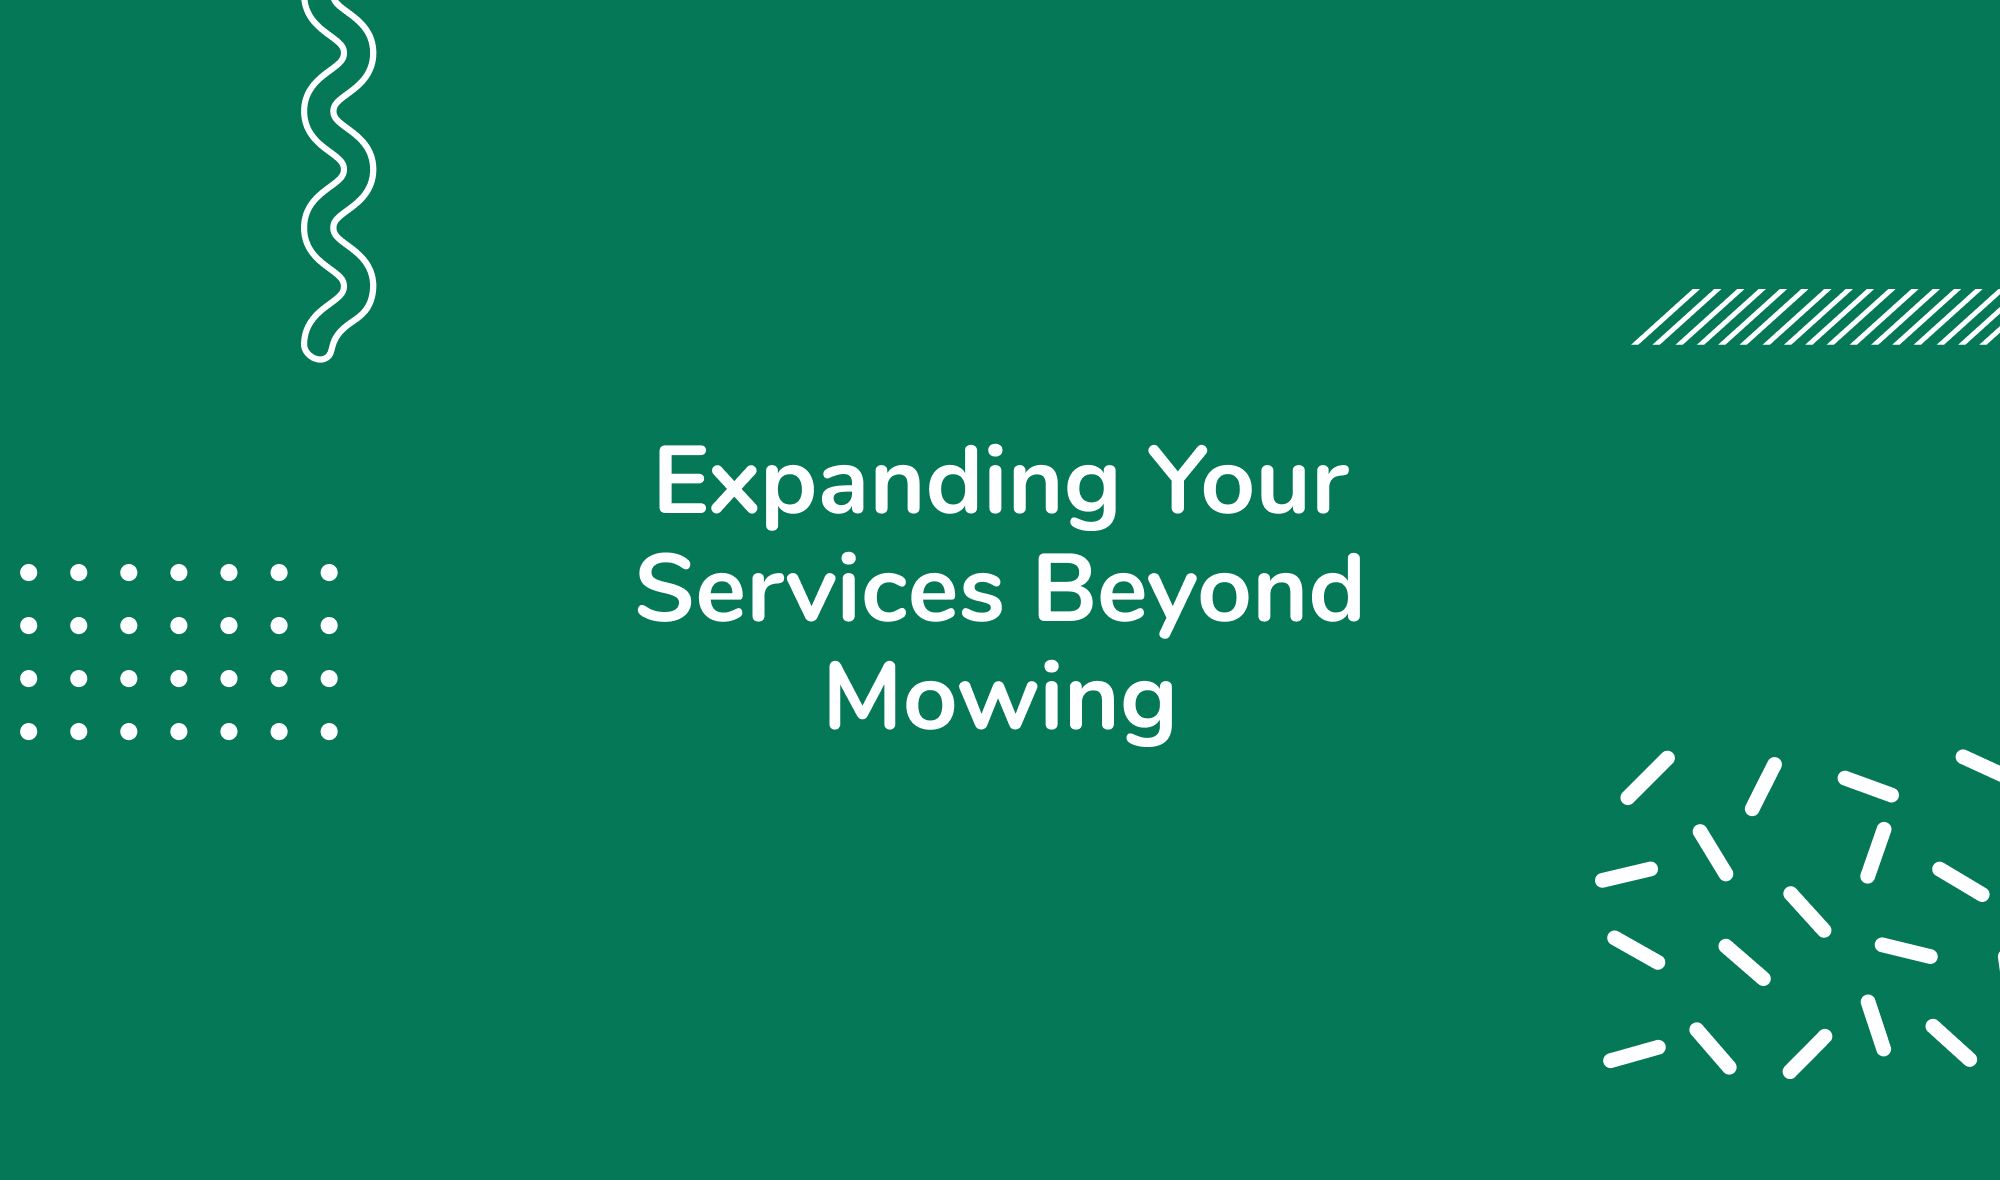 Expanding Your Services Beyond Mowing